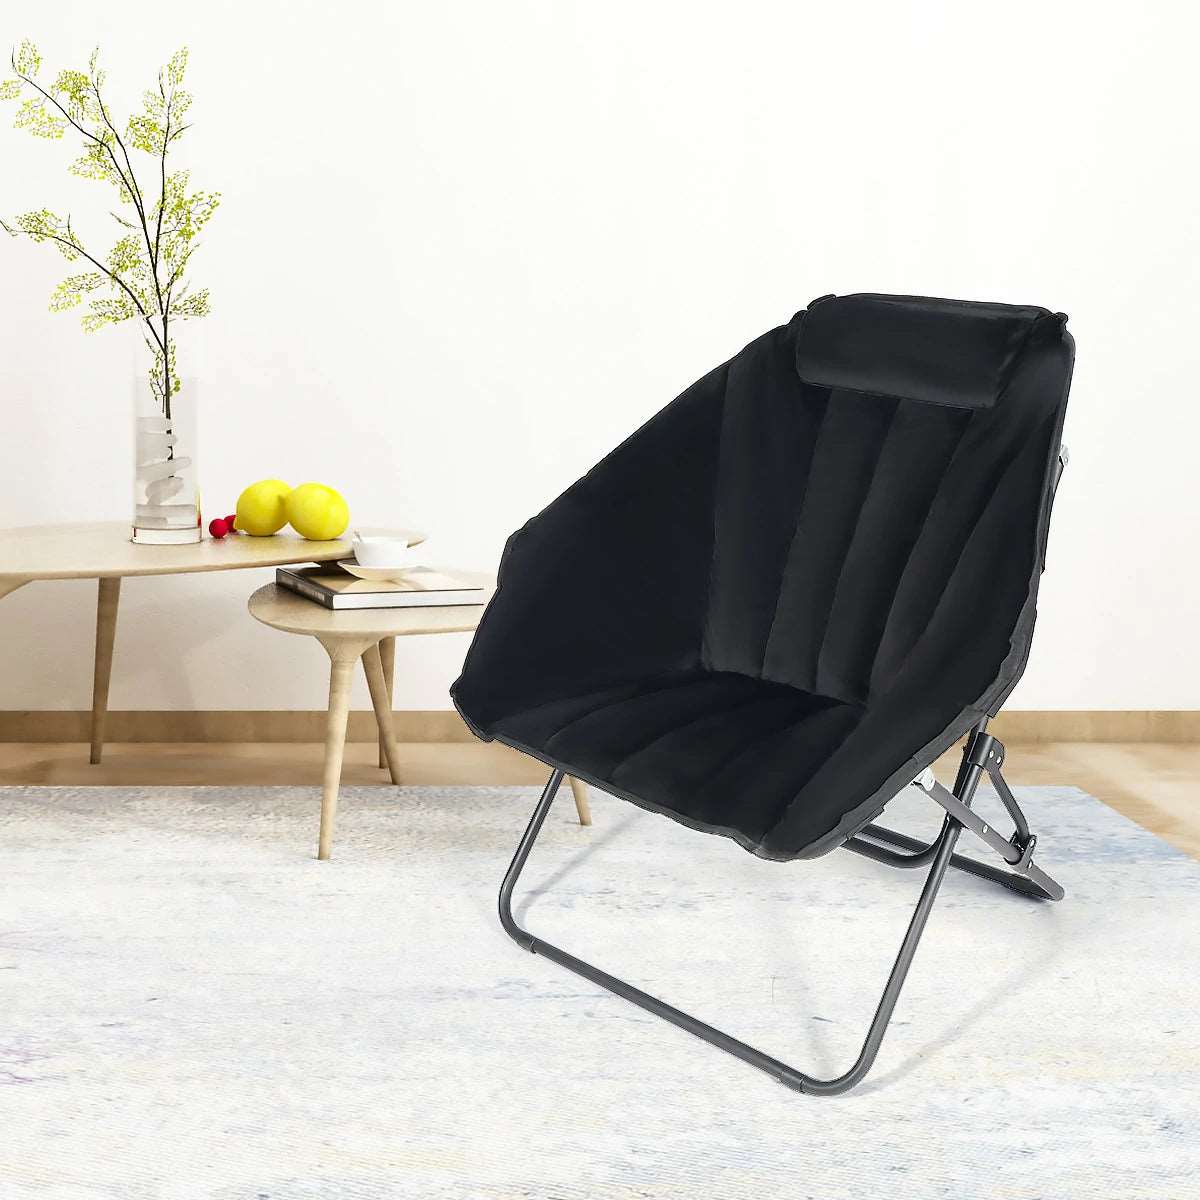 Oversized Folding Saucer Chairs for Adults